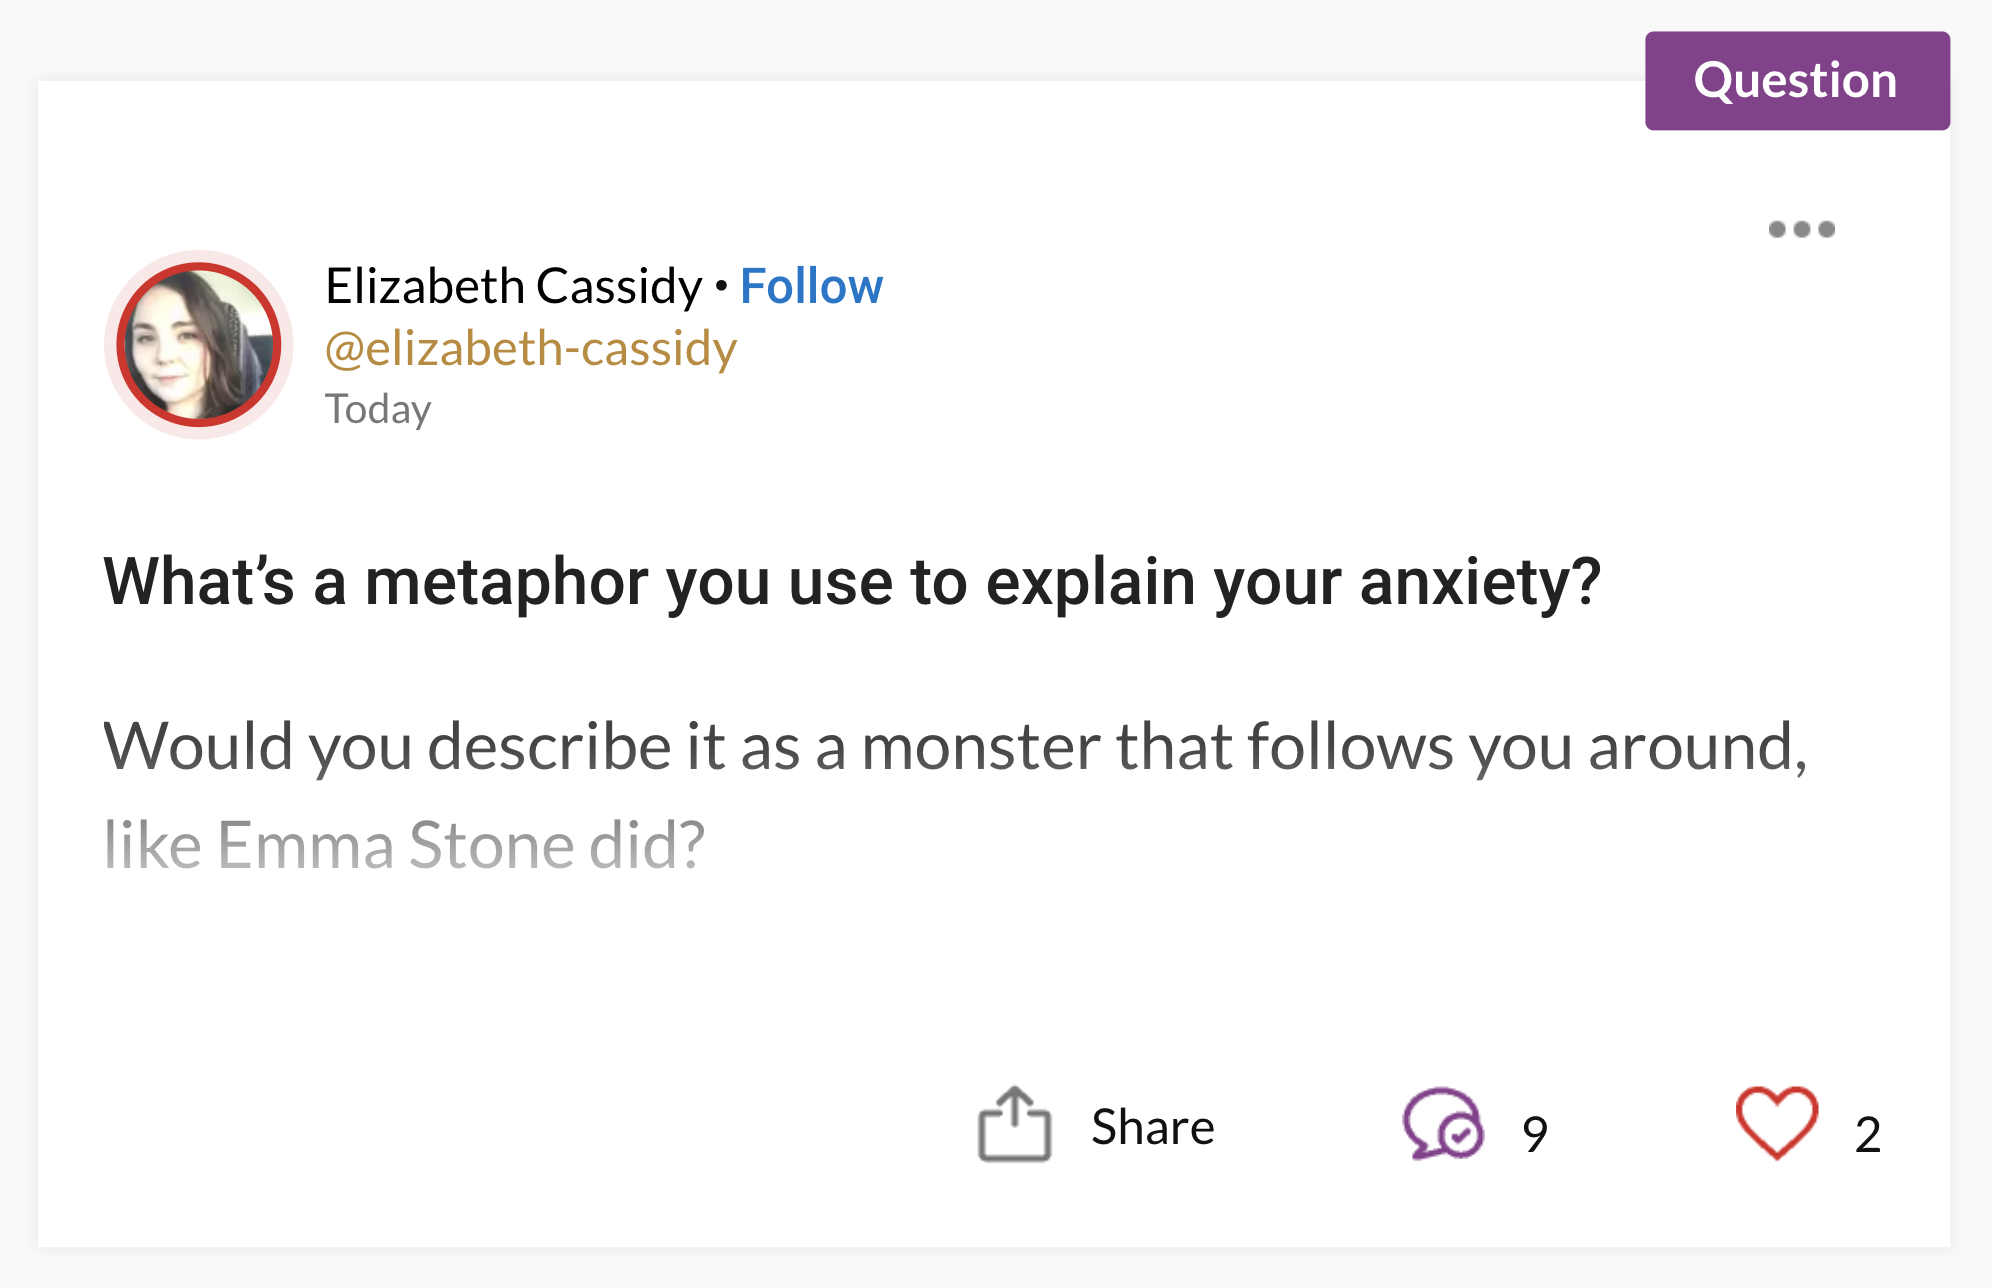 What's a metaphor you use to explain your anxiety? Would you describe it as a monster that follows you around, like Emma Stone did? How would you describe it so others could "see" it or understand? #Anxiety #MentalHealth